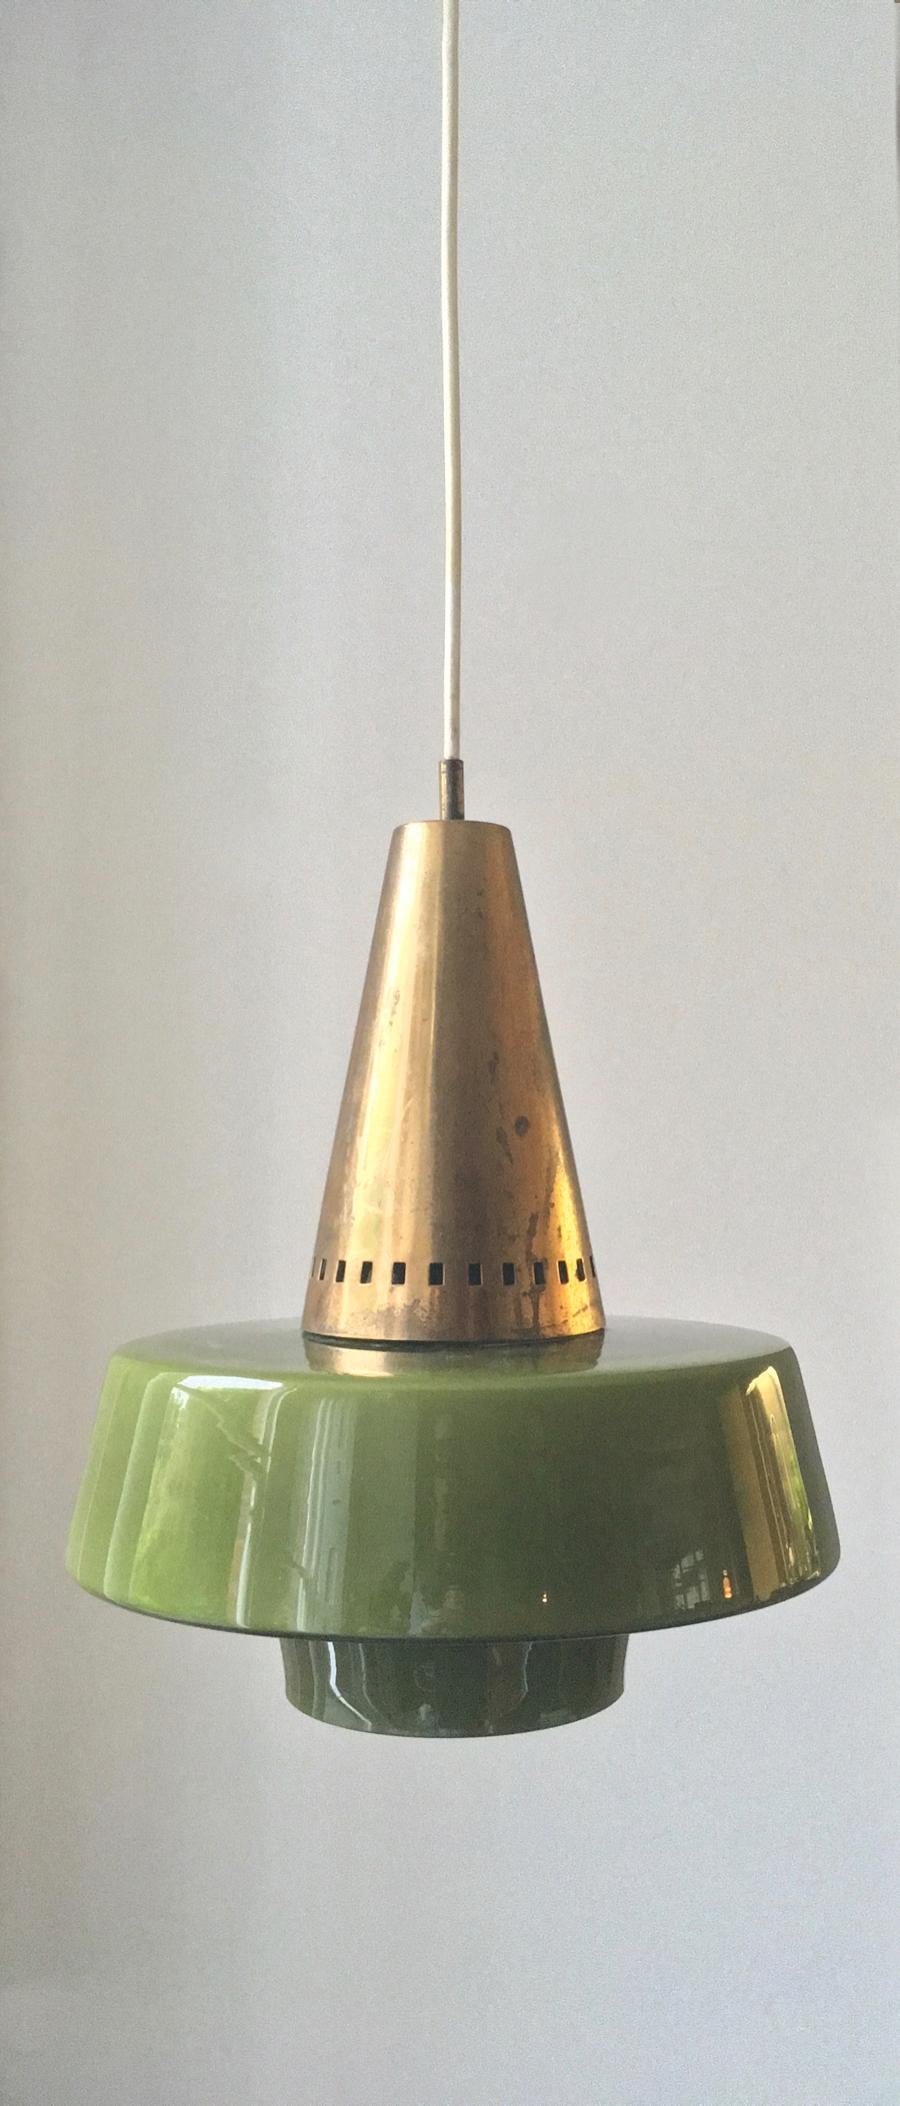 A ceiling pendant light of pierced brass, with green cased glass diffuser, by Stilnovo of Milan, Italy, mid-20th century, (circa 1950s). A beautiful understated fixture, very nicely made, in good vintage condition. Very unusually, the fixing bears